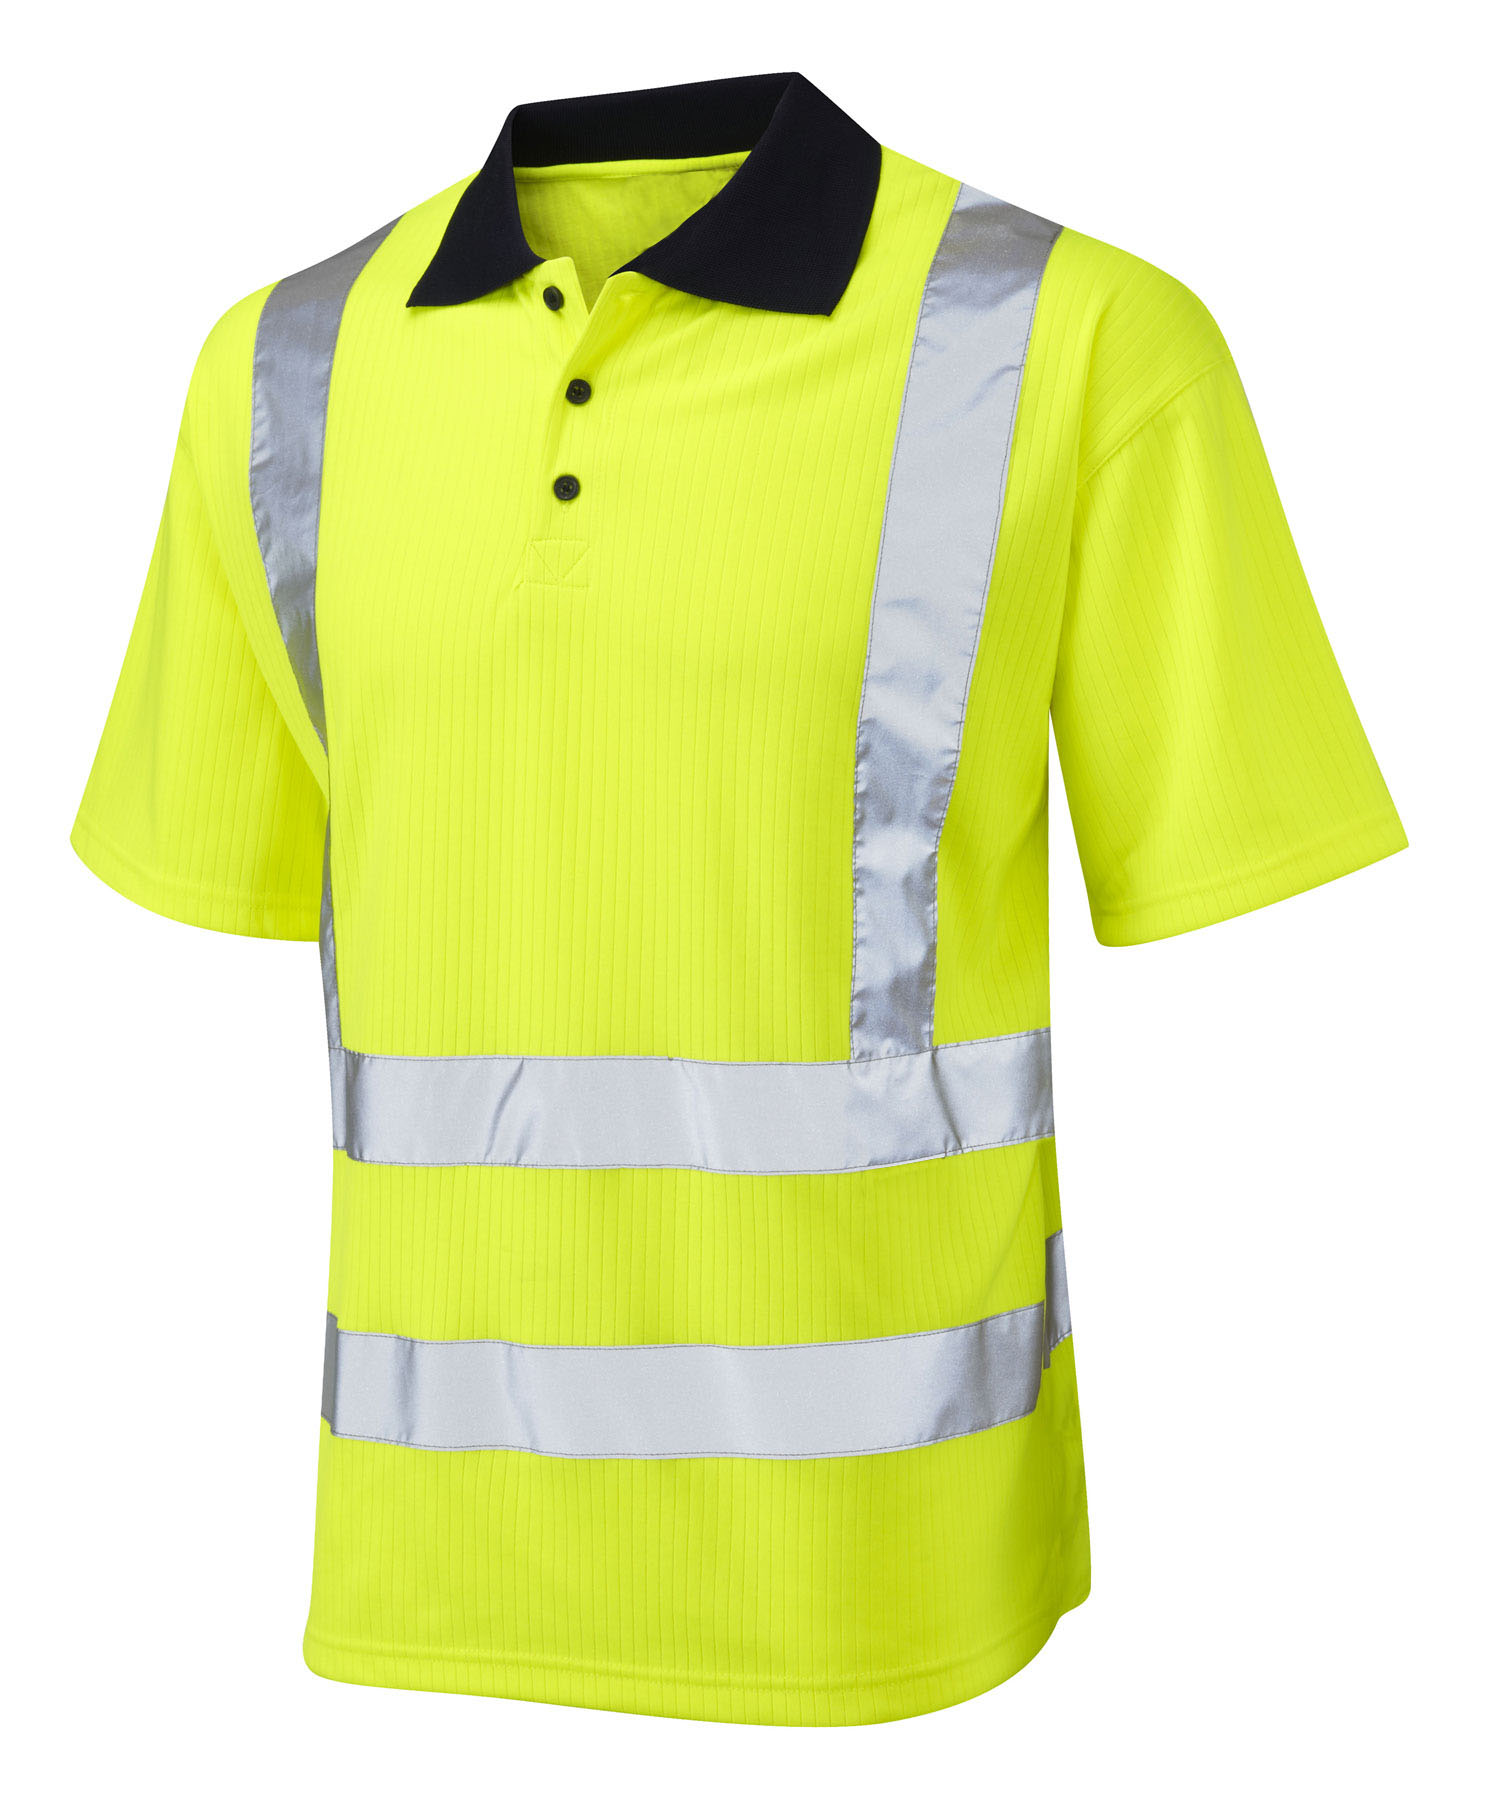 FIRE RESISTANT WORK POLO SHIRTS-1396 - Rift Safety Gear Australia